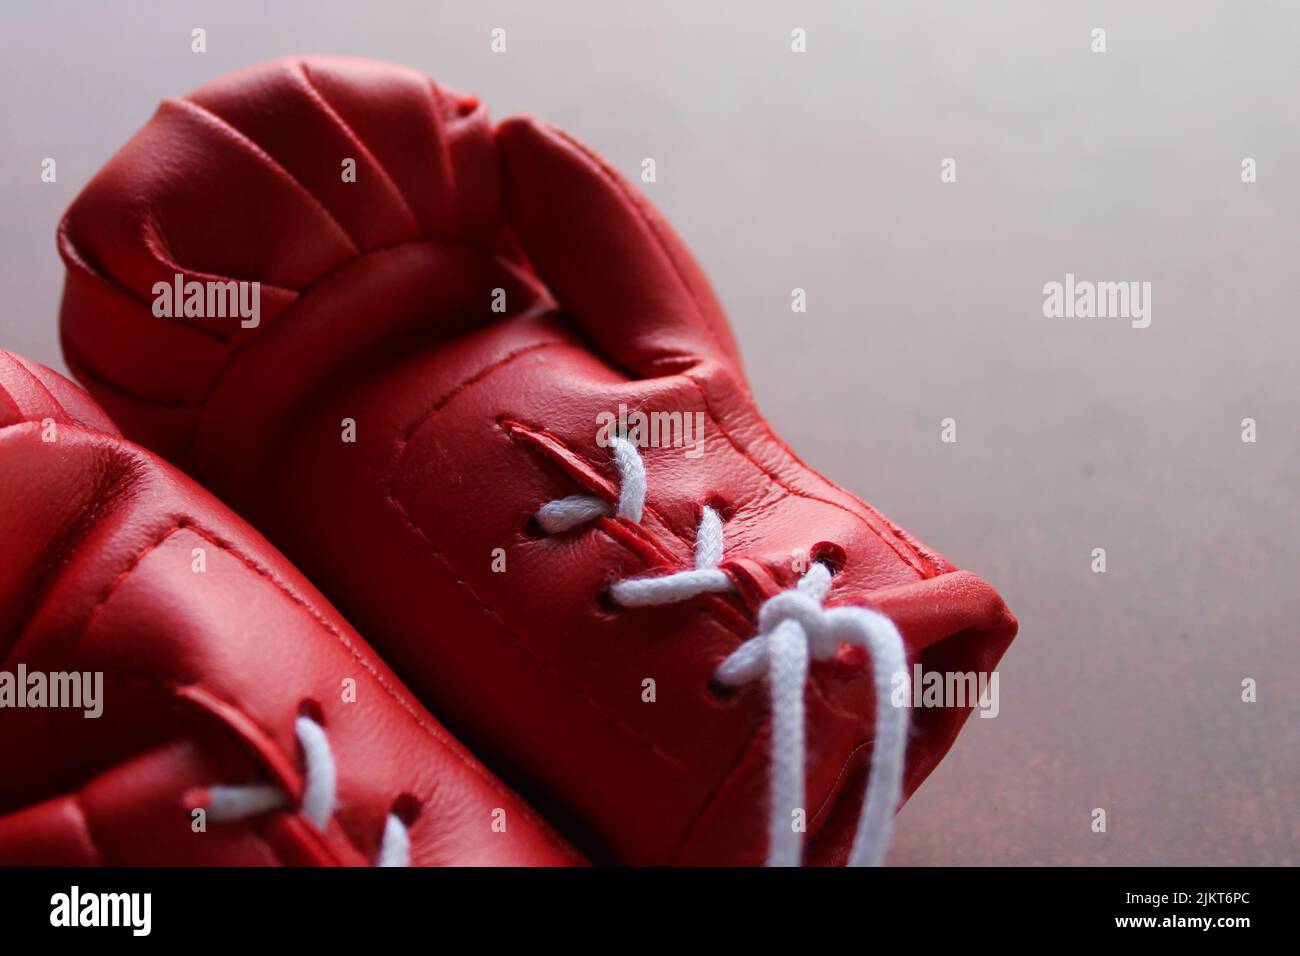 Close up image of red boxing gloves on table. Sports concept Stock Photo